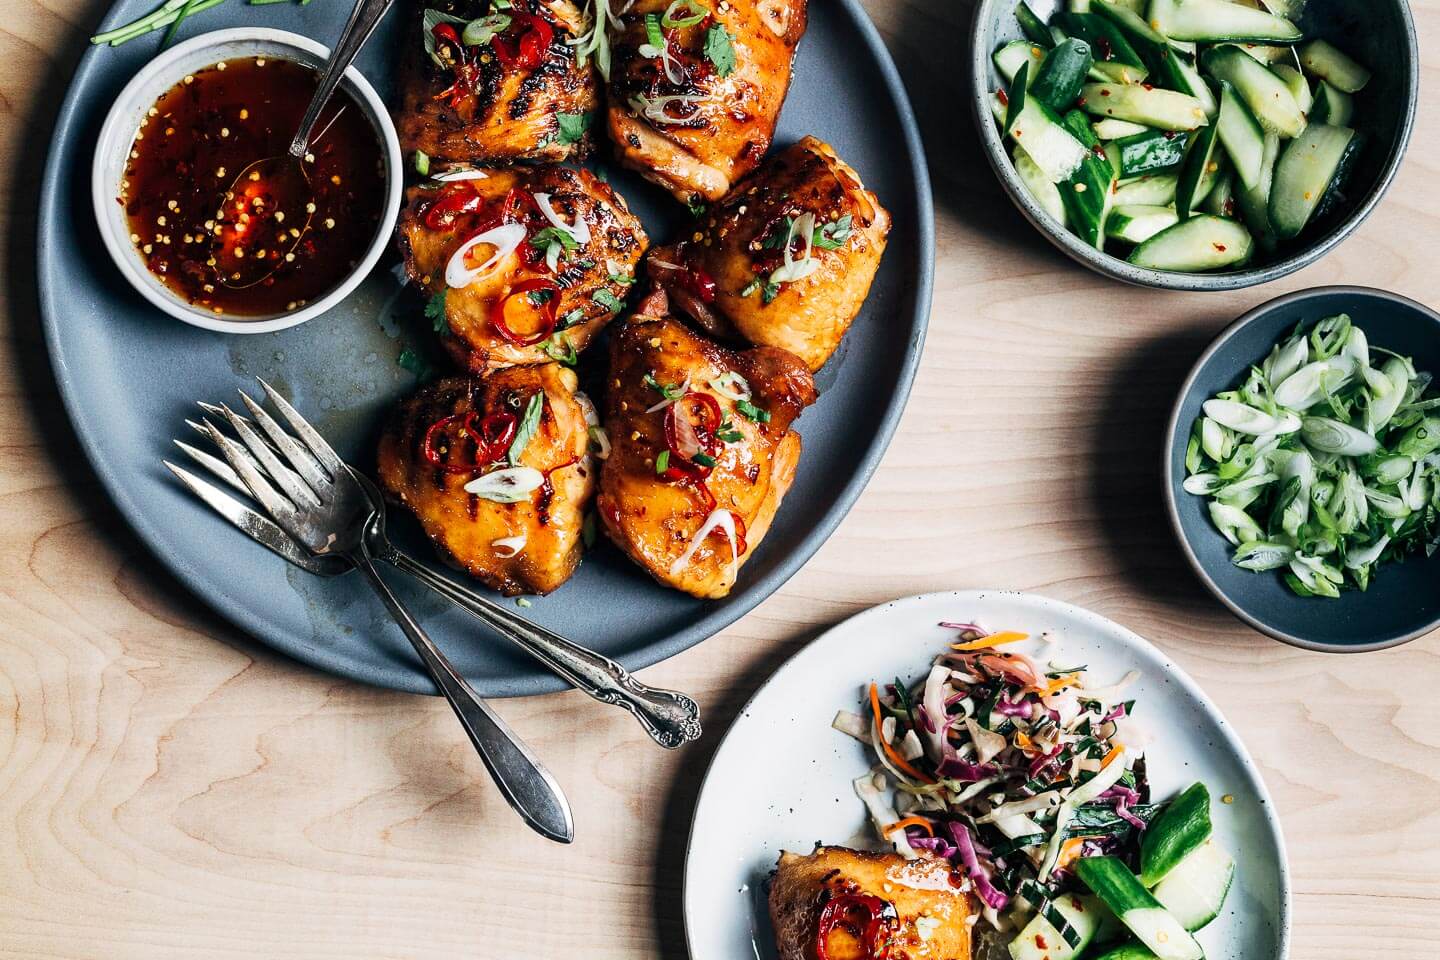 These hot honey grilled chicken thighs have it all – smoky char from the grill, crispy skin that's sticky sweet with a kick of heat, and wonderfully tender, falling off the bone meat.